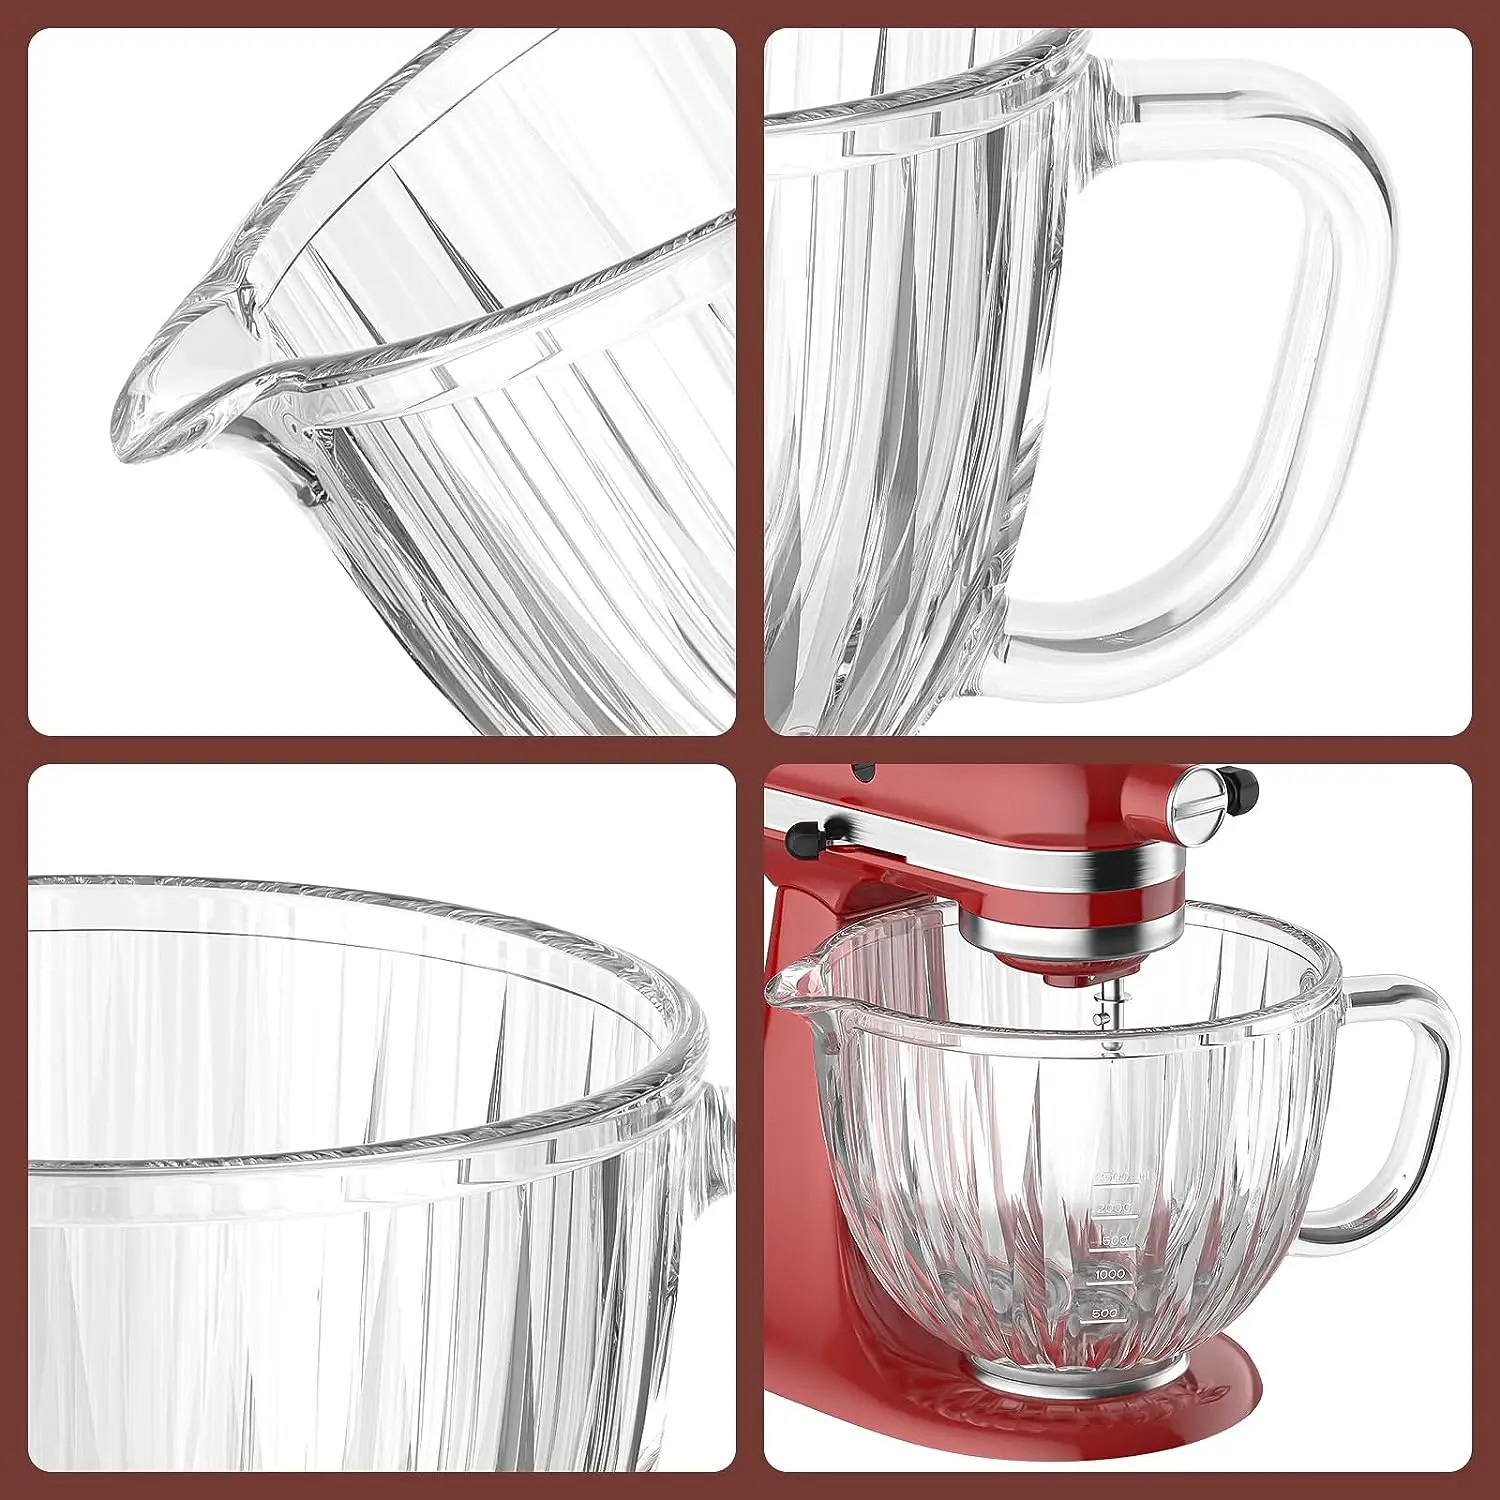 Glass Bowl Compatible With KITCHENAID 4.5/5 QT Tilt-Head Stand Mixer,with  Measurement Markings,Allows Placing it in the Microwave and Refrigeratr